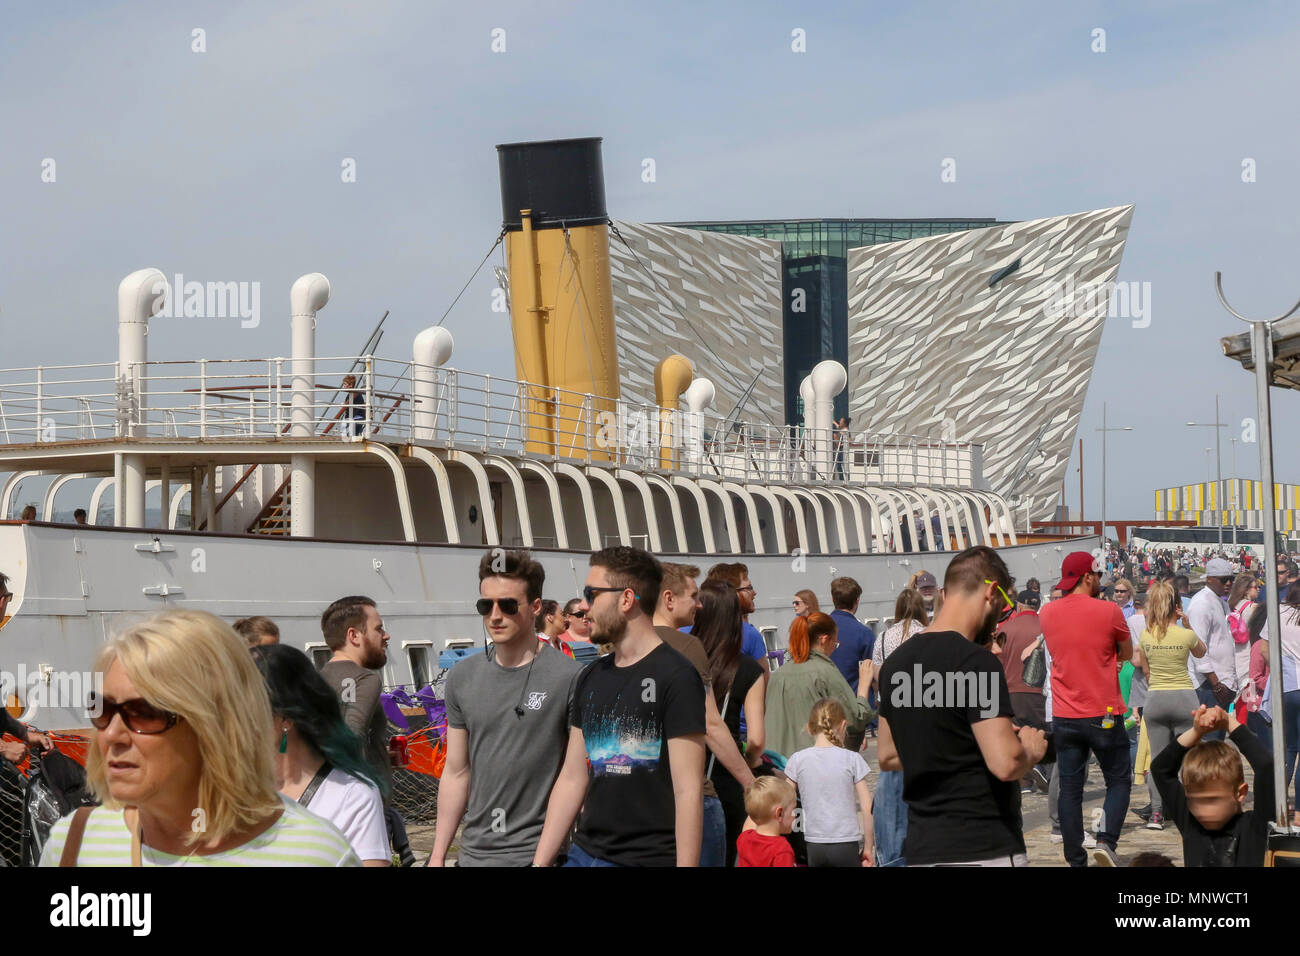 Belfast, UK, 19 May 2018. Titanic Quarter and Donegall Quay Belfast, Northern Ireland, UK. 19 May 2018. The Belfast Titanic Maritime Festival is being held today and tomorrow (Sunday 20th May). The maritime-themed festival is centred around the docks and has visiting ships, tall ships and family themed events as well as a food market. Credit: David Hunter/Alamy Live News. Stock Photo